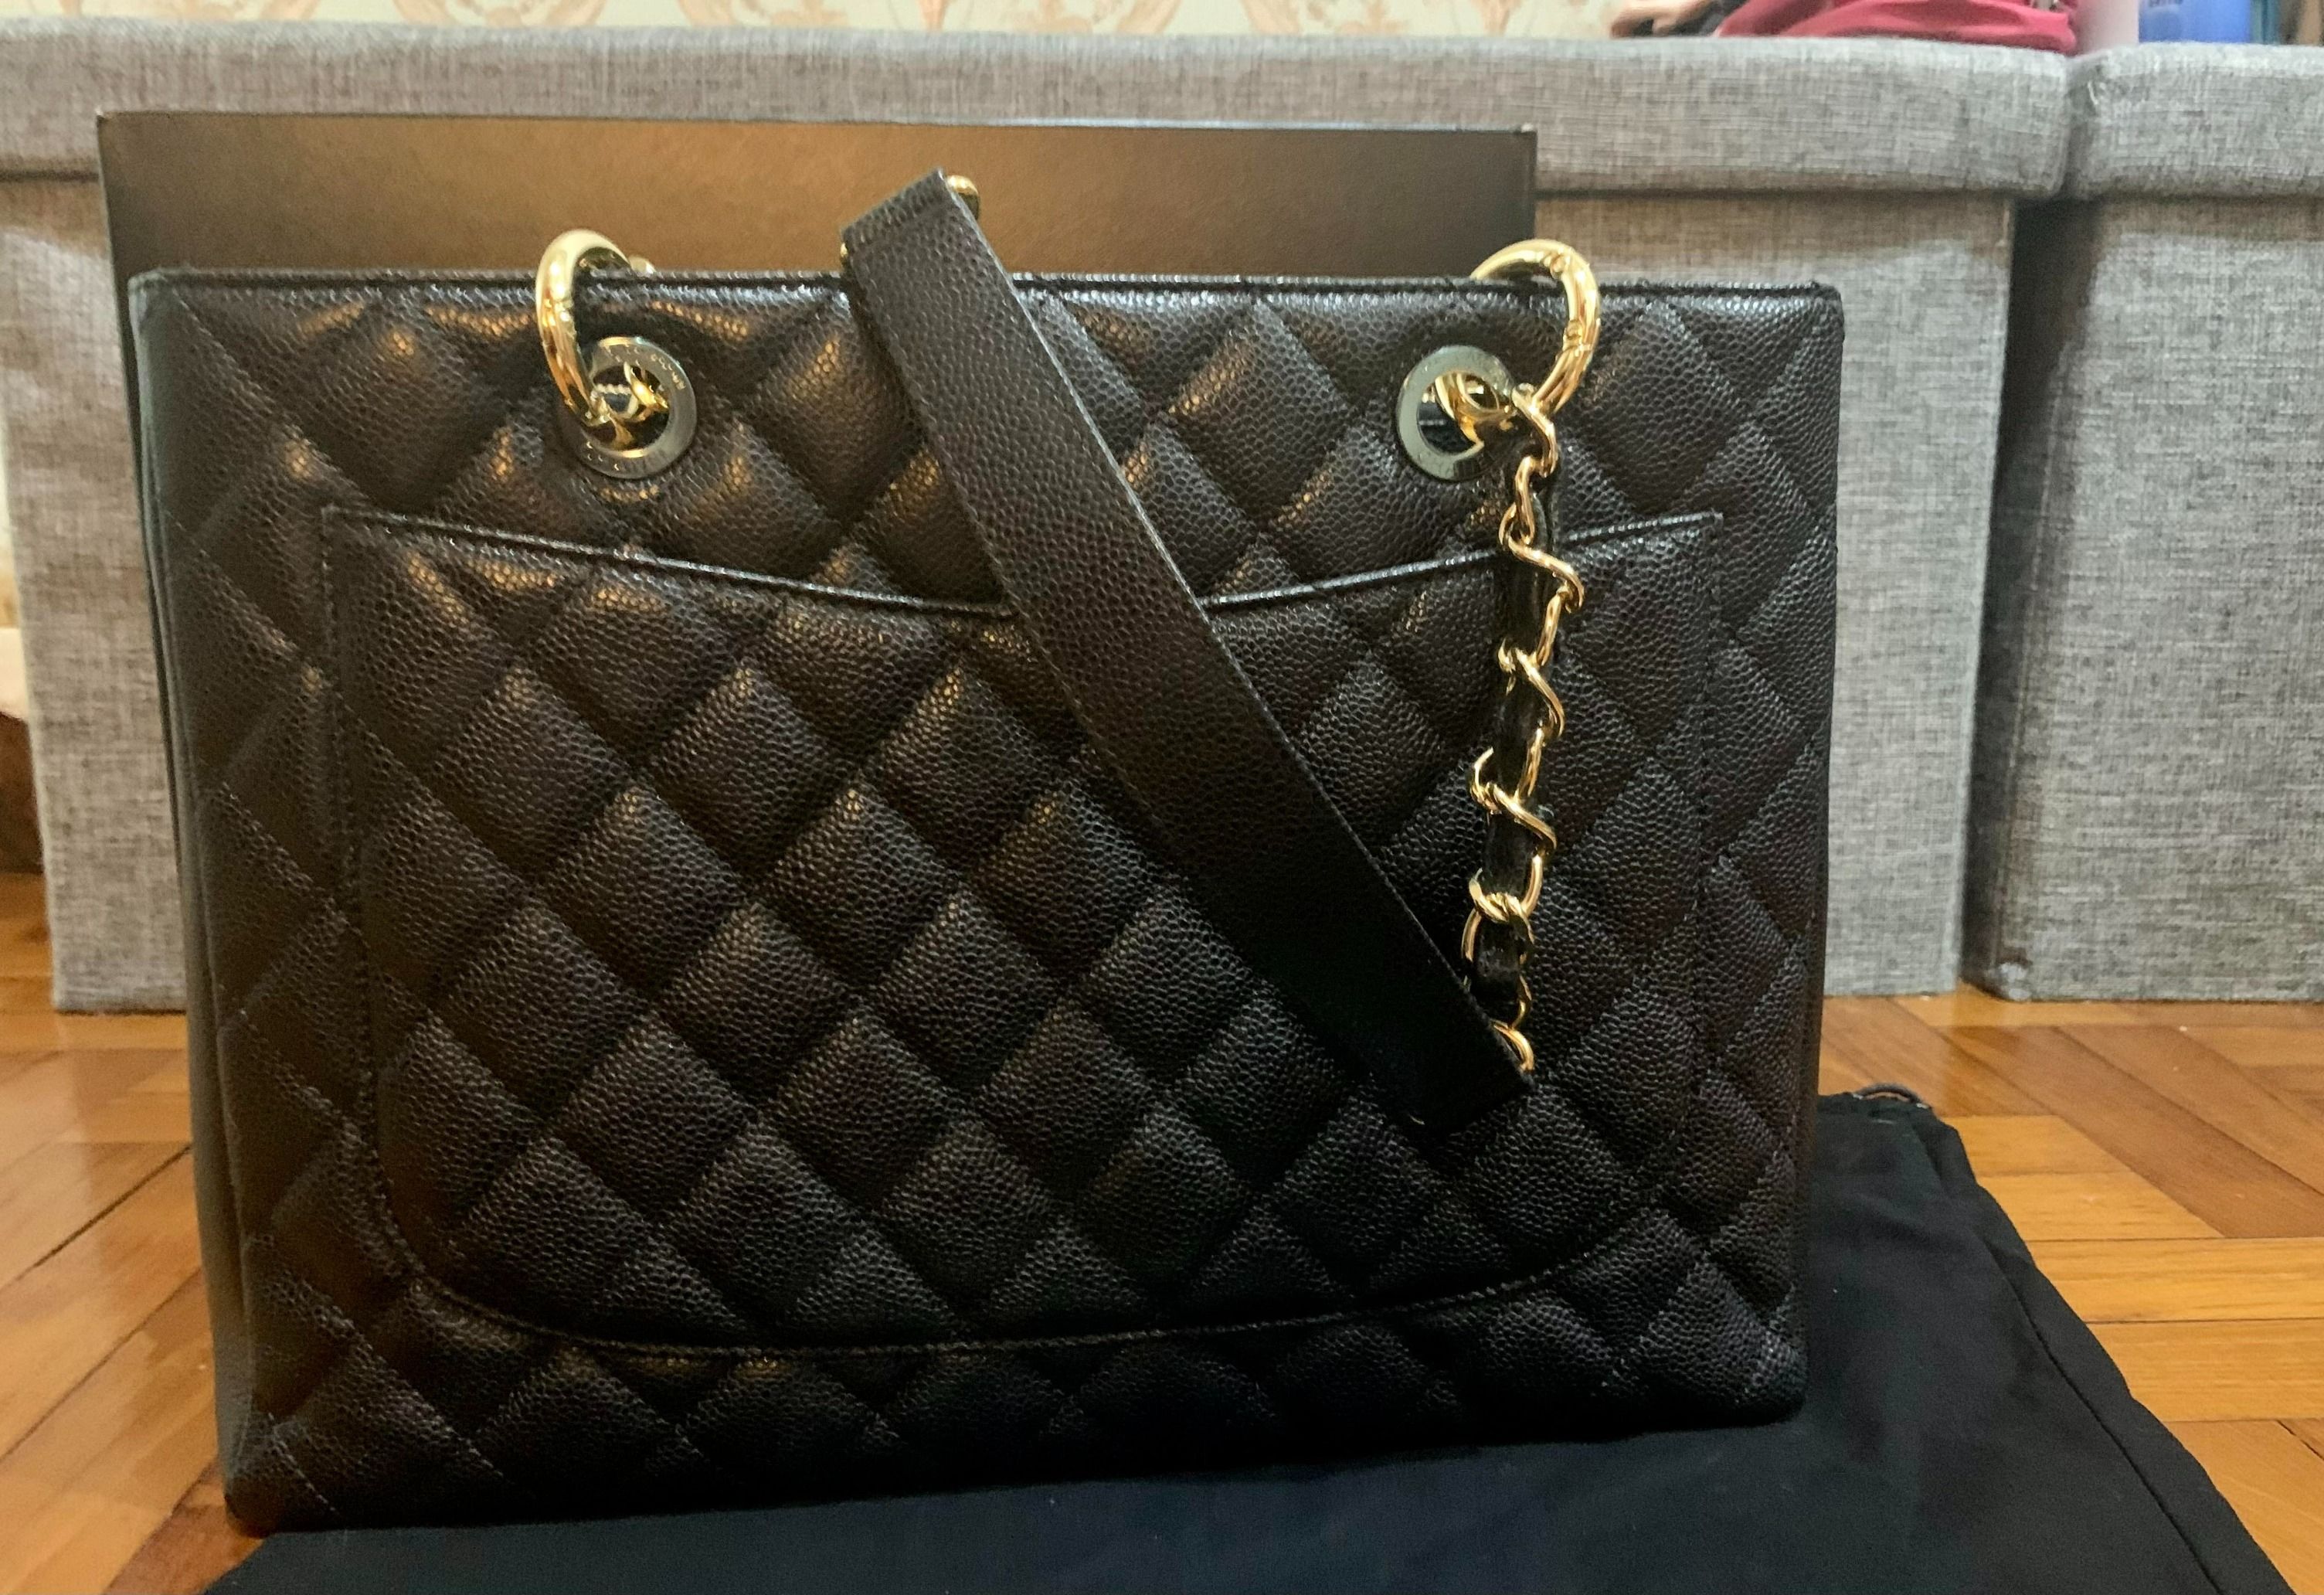 CHANEL GST Grand Shopping Tote in Gold Hardware Caviar Leather